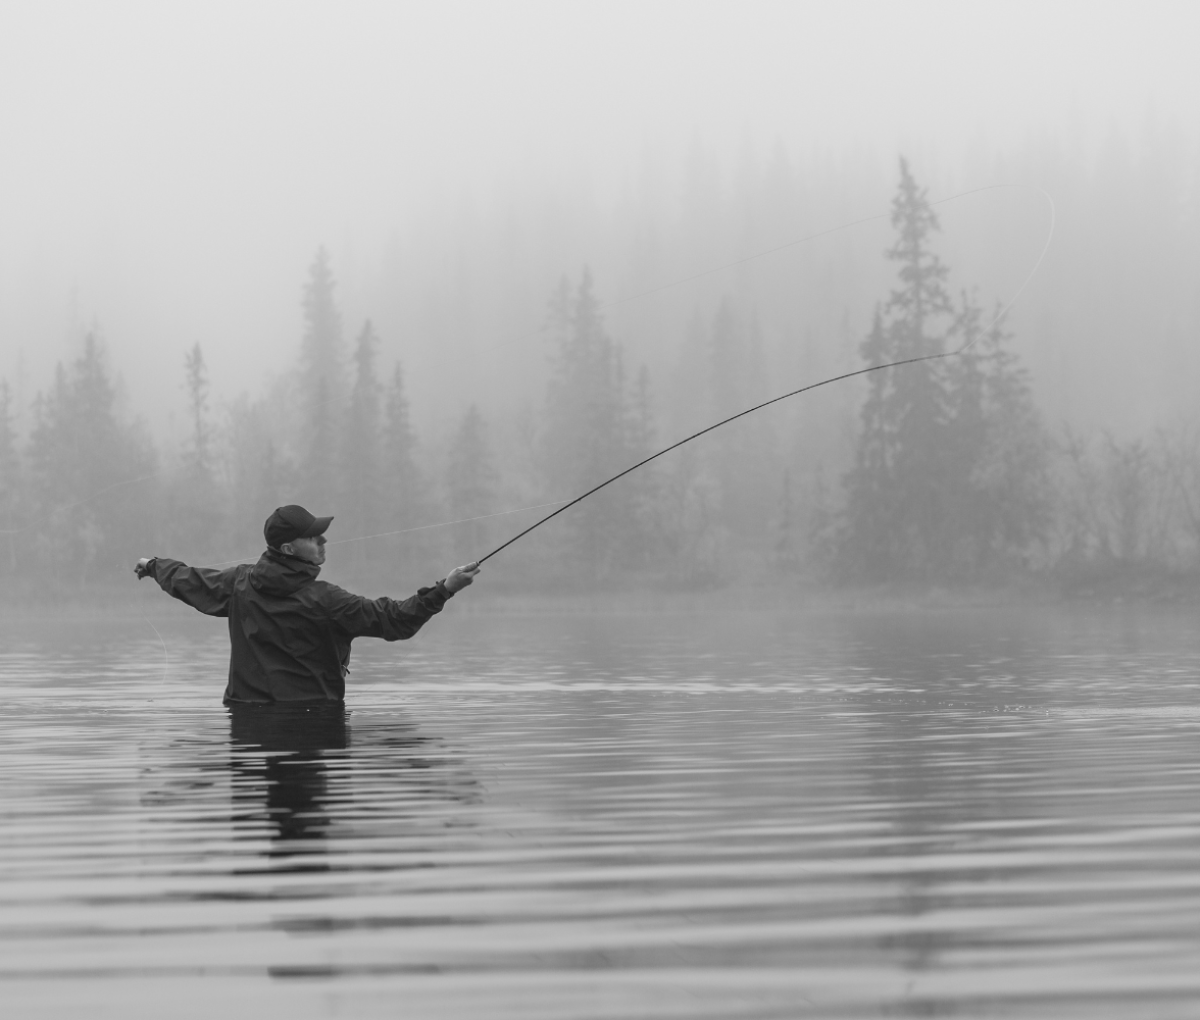 a person fly-fishing on a misty day in a lake in Jämtland Härjedalen,